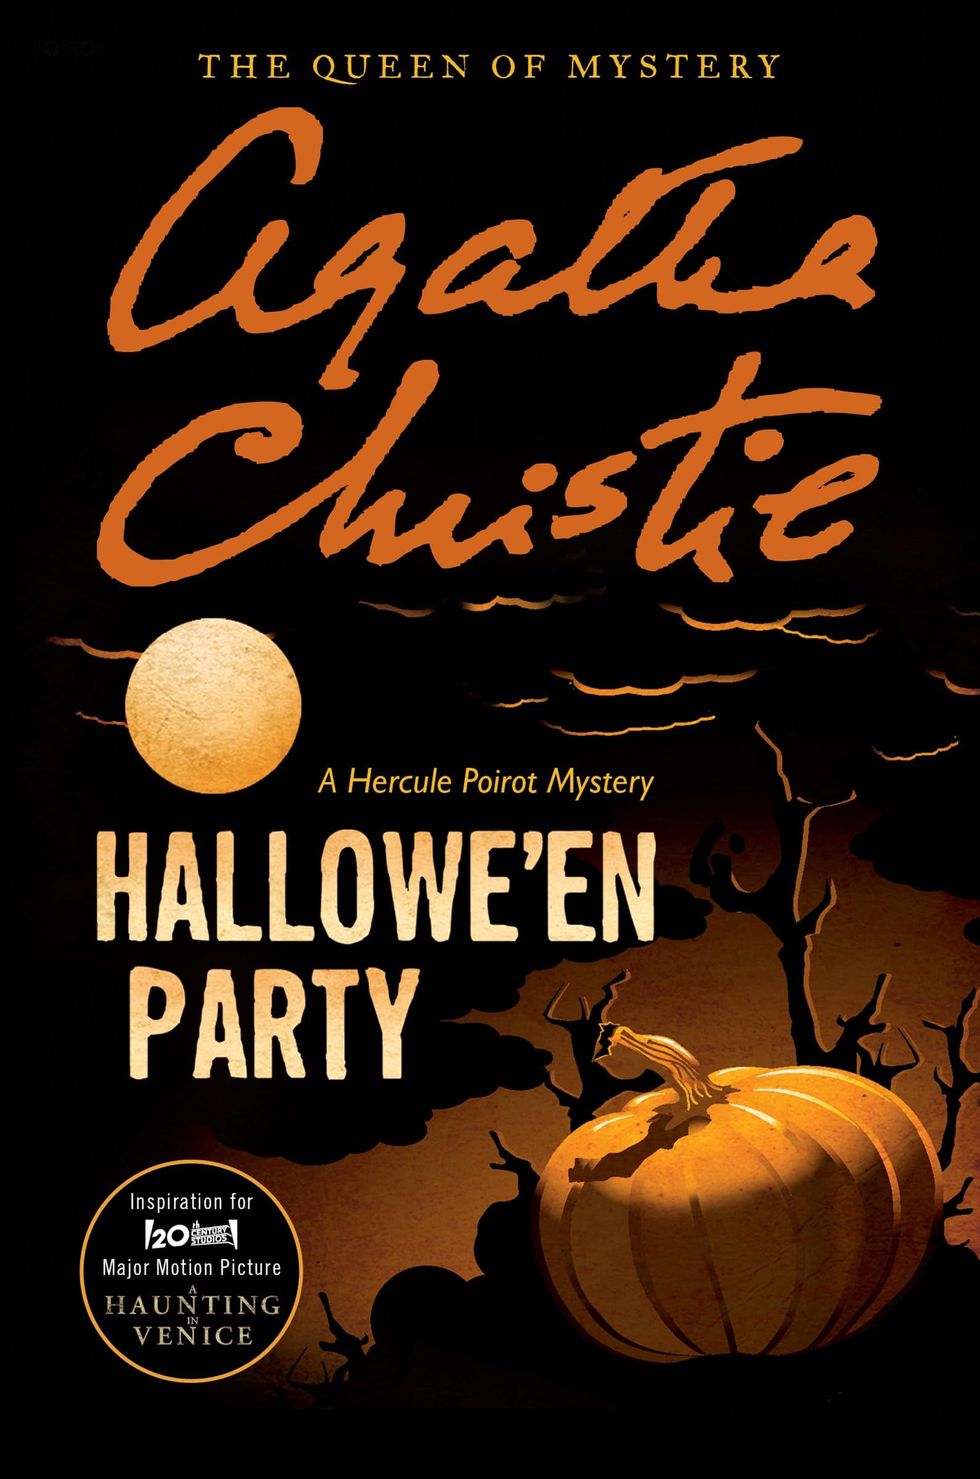 Hallowe'en Occasion: Inspiration for the twentieth Century Studios Predominant Motion Picture A Haunting in Venice (Hercule Poirot Mysteries, 36)